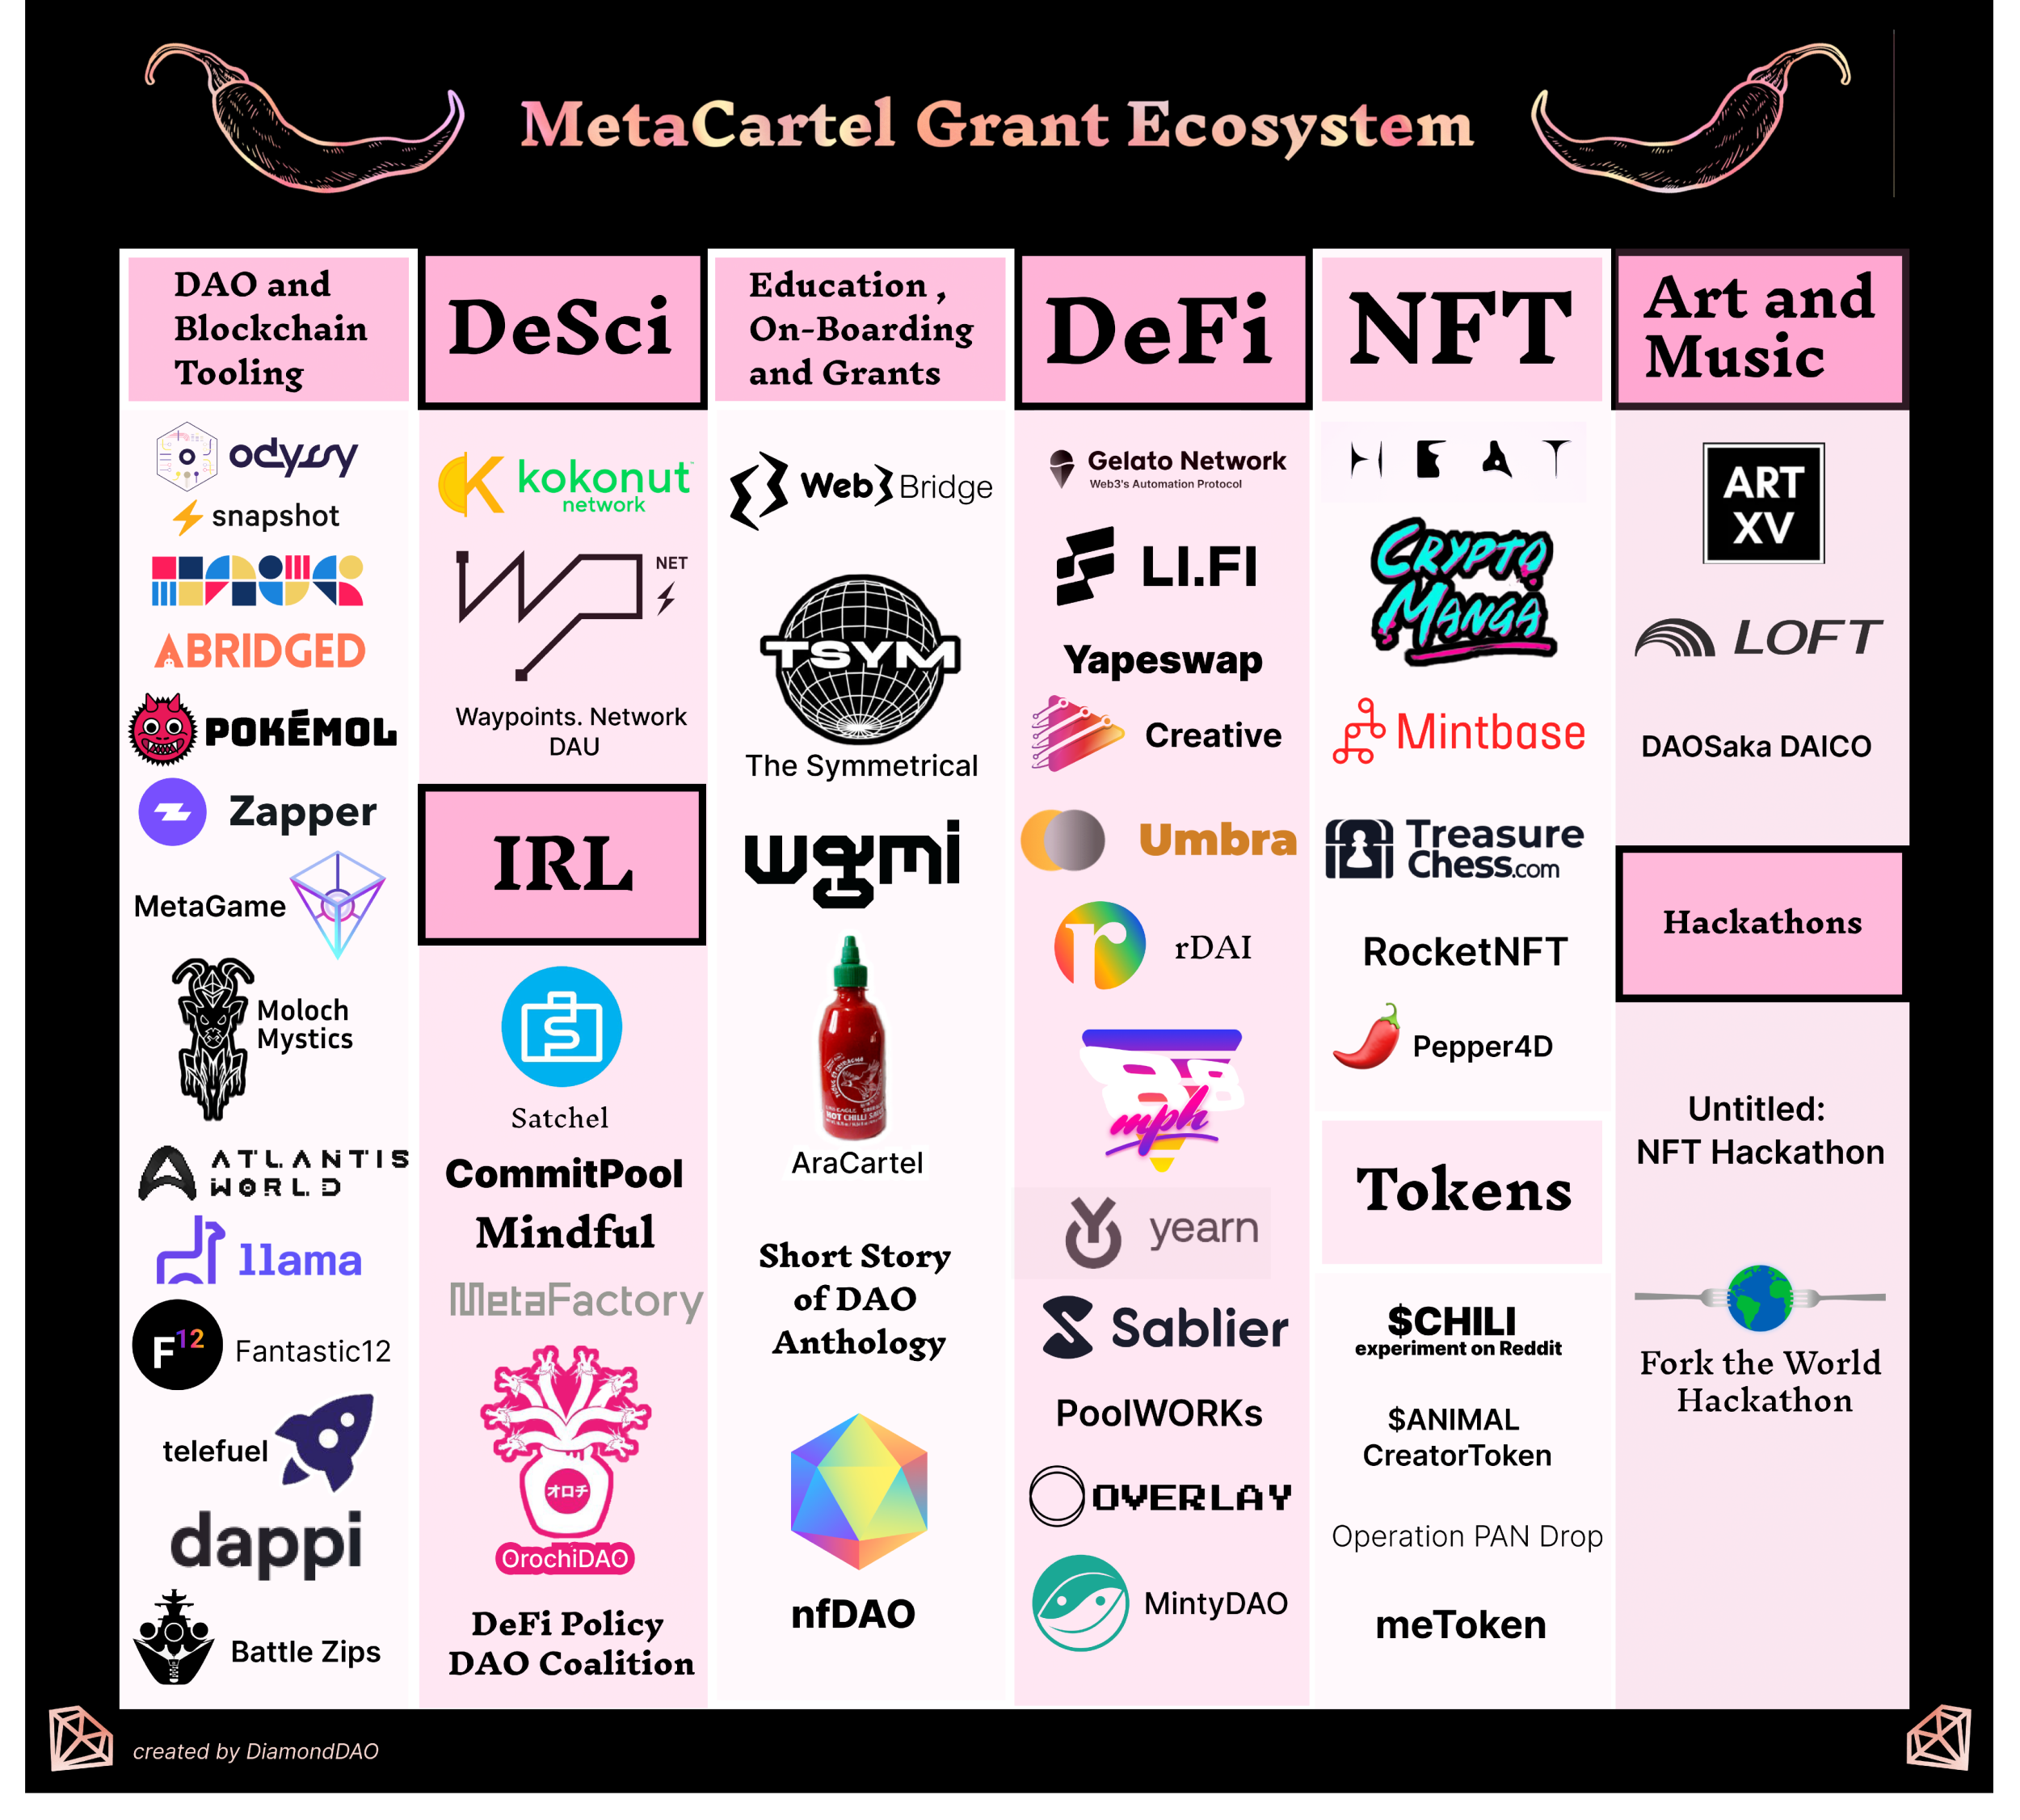 An abridged mapping of organizations and initiatives awarded grants by MetaCartel